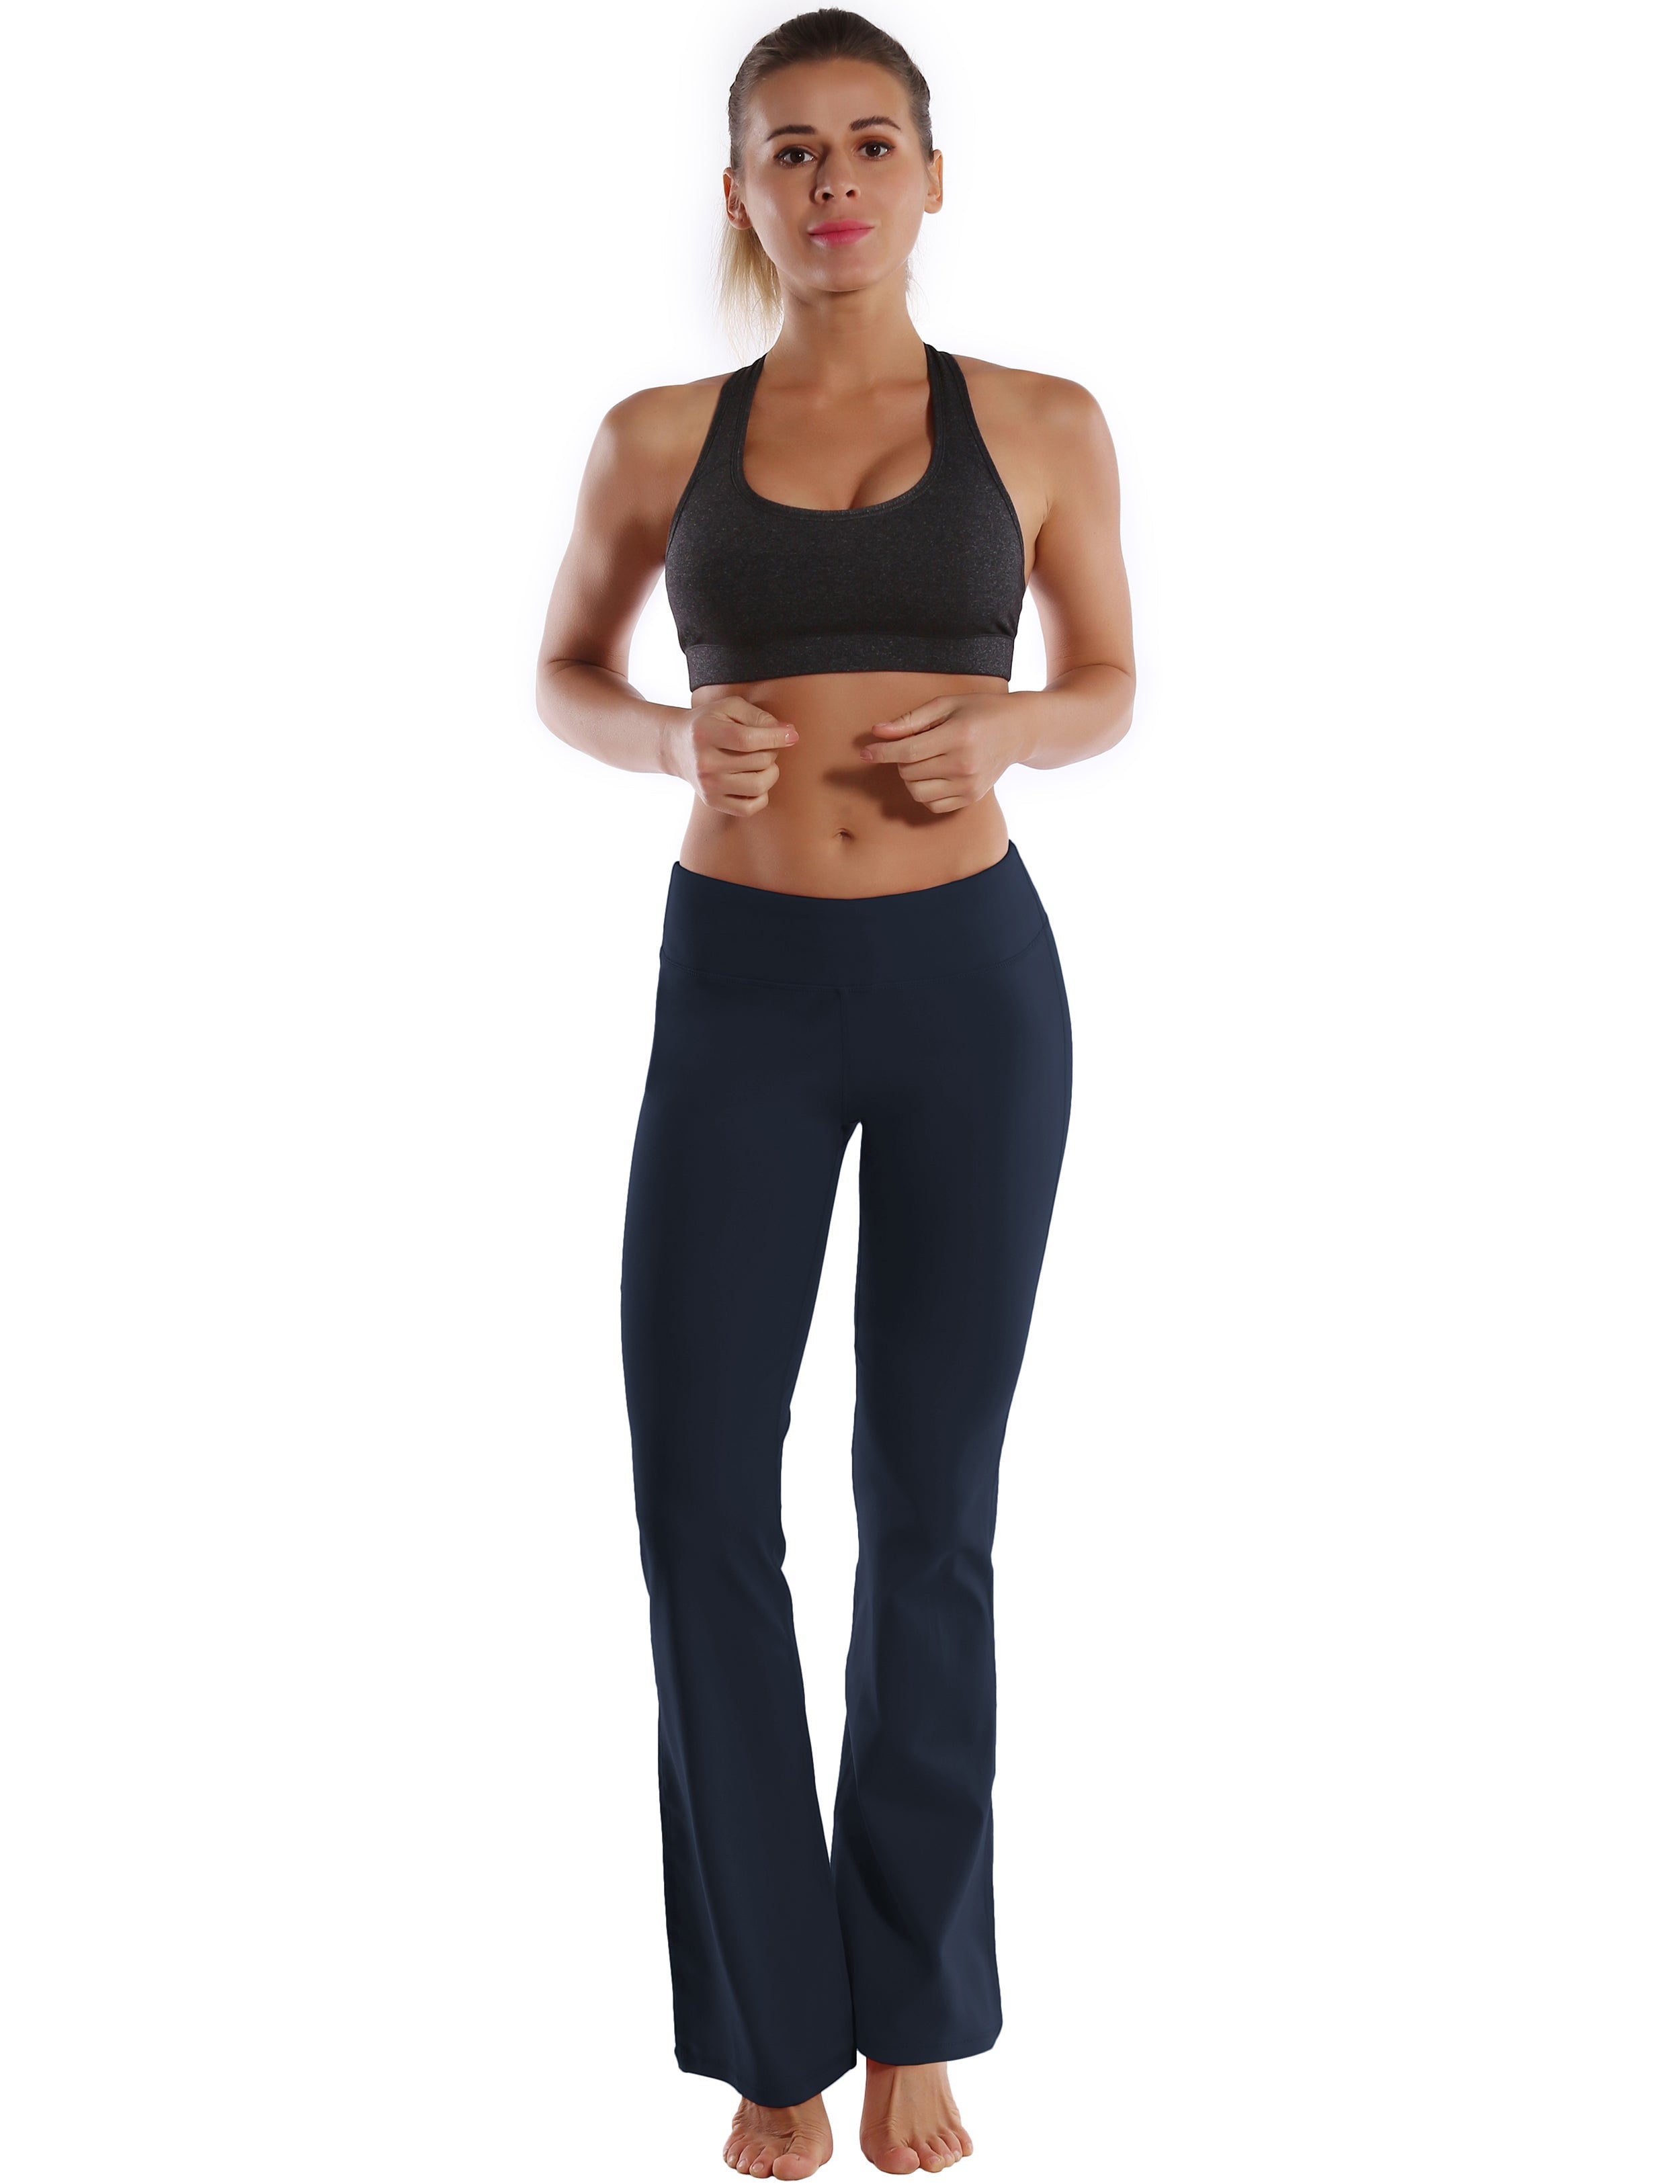 Back Pockets Bootcut Leggings darknavy 87%Nylon/13%Spandex Fabric doesn't attract lint easily 4-way stretch No see-through Moisture-wicking Inner pocket Four lengths